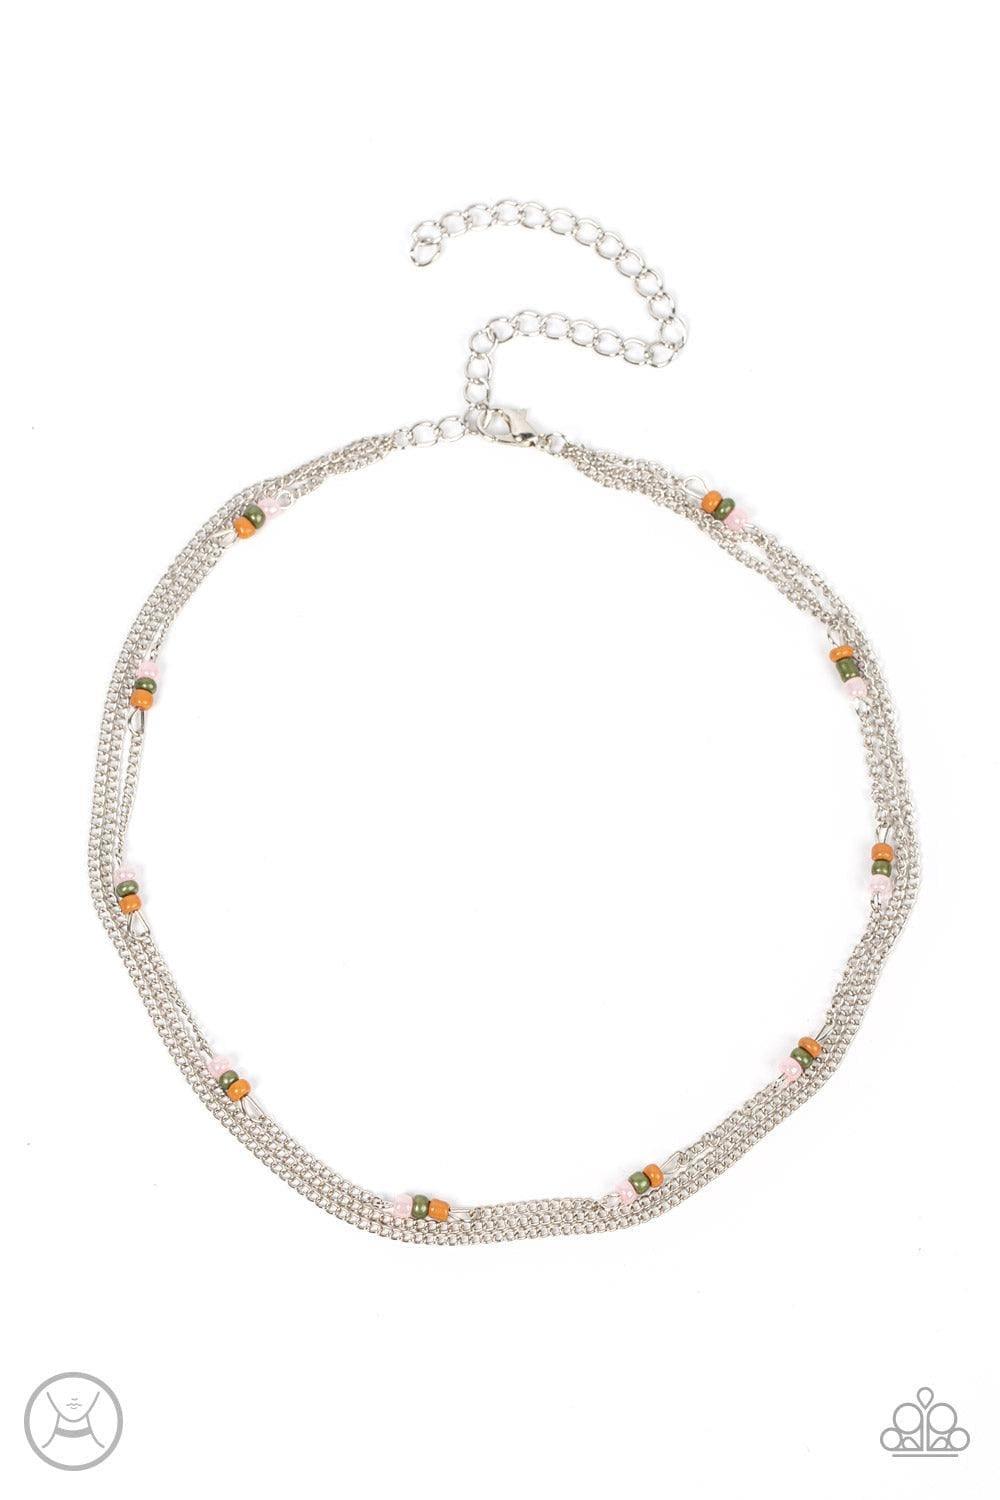 Paparazzi Accessories - Bountifully Beaded - Multicolor Choker Necklace - Bling by JessieK